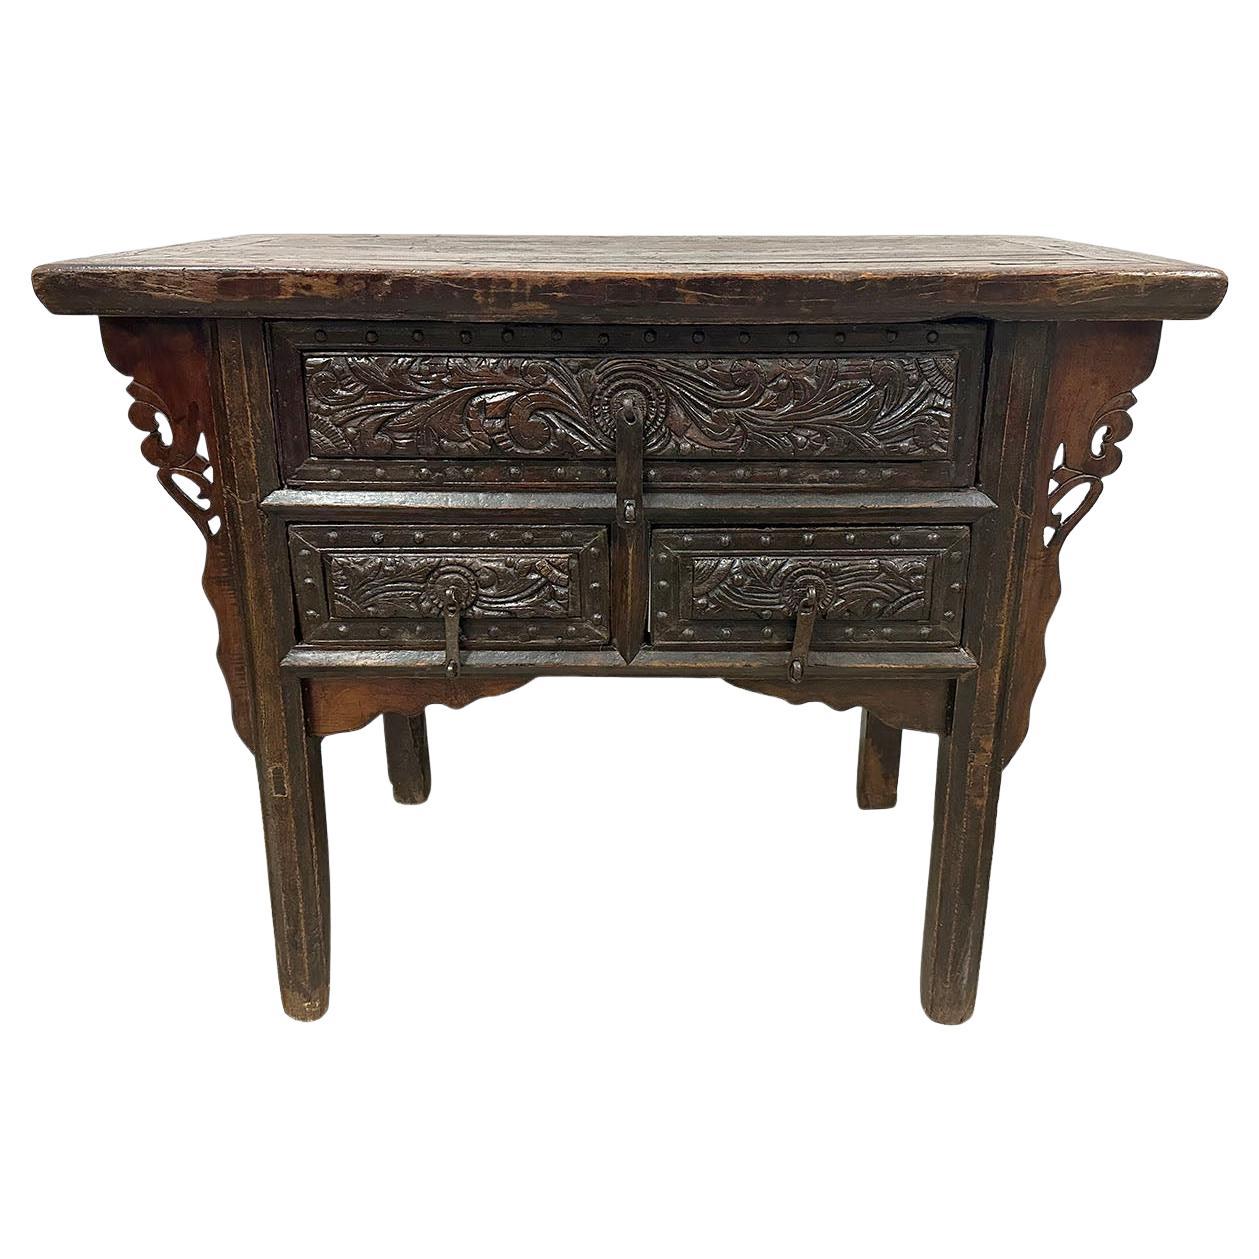 19 Century Antique Chinese Carved Shan Xi Console Table/Sideboard For Sale